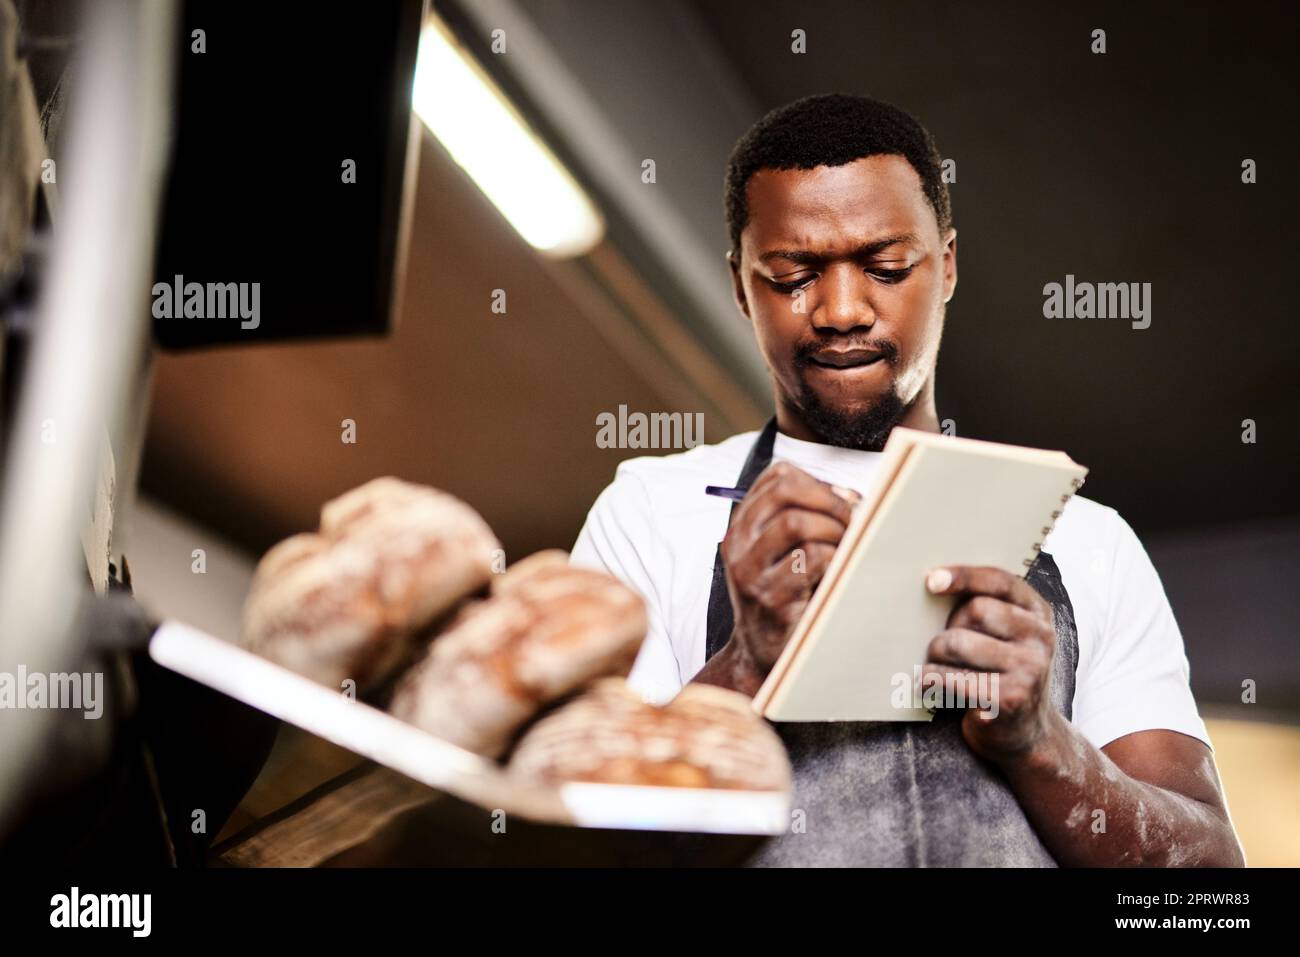 Now Im halfway through my order list. a male baker making notes while working in his bakery. Stock Photo